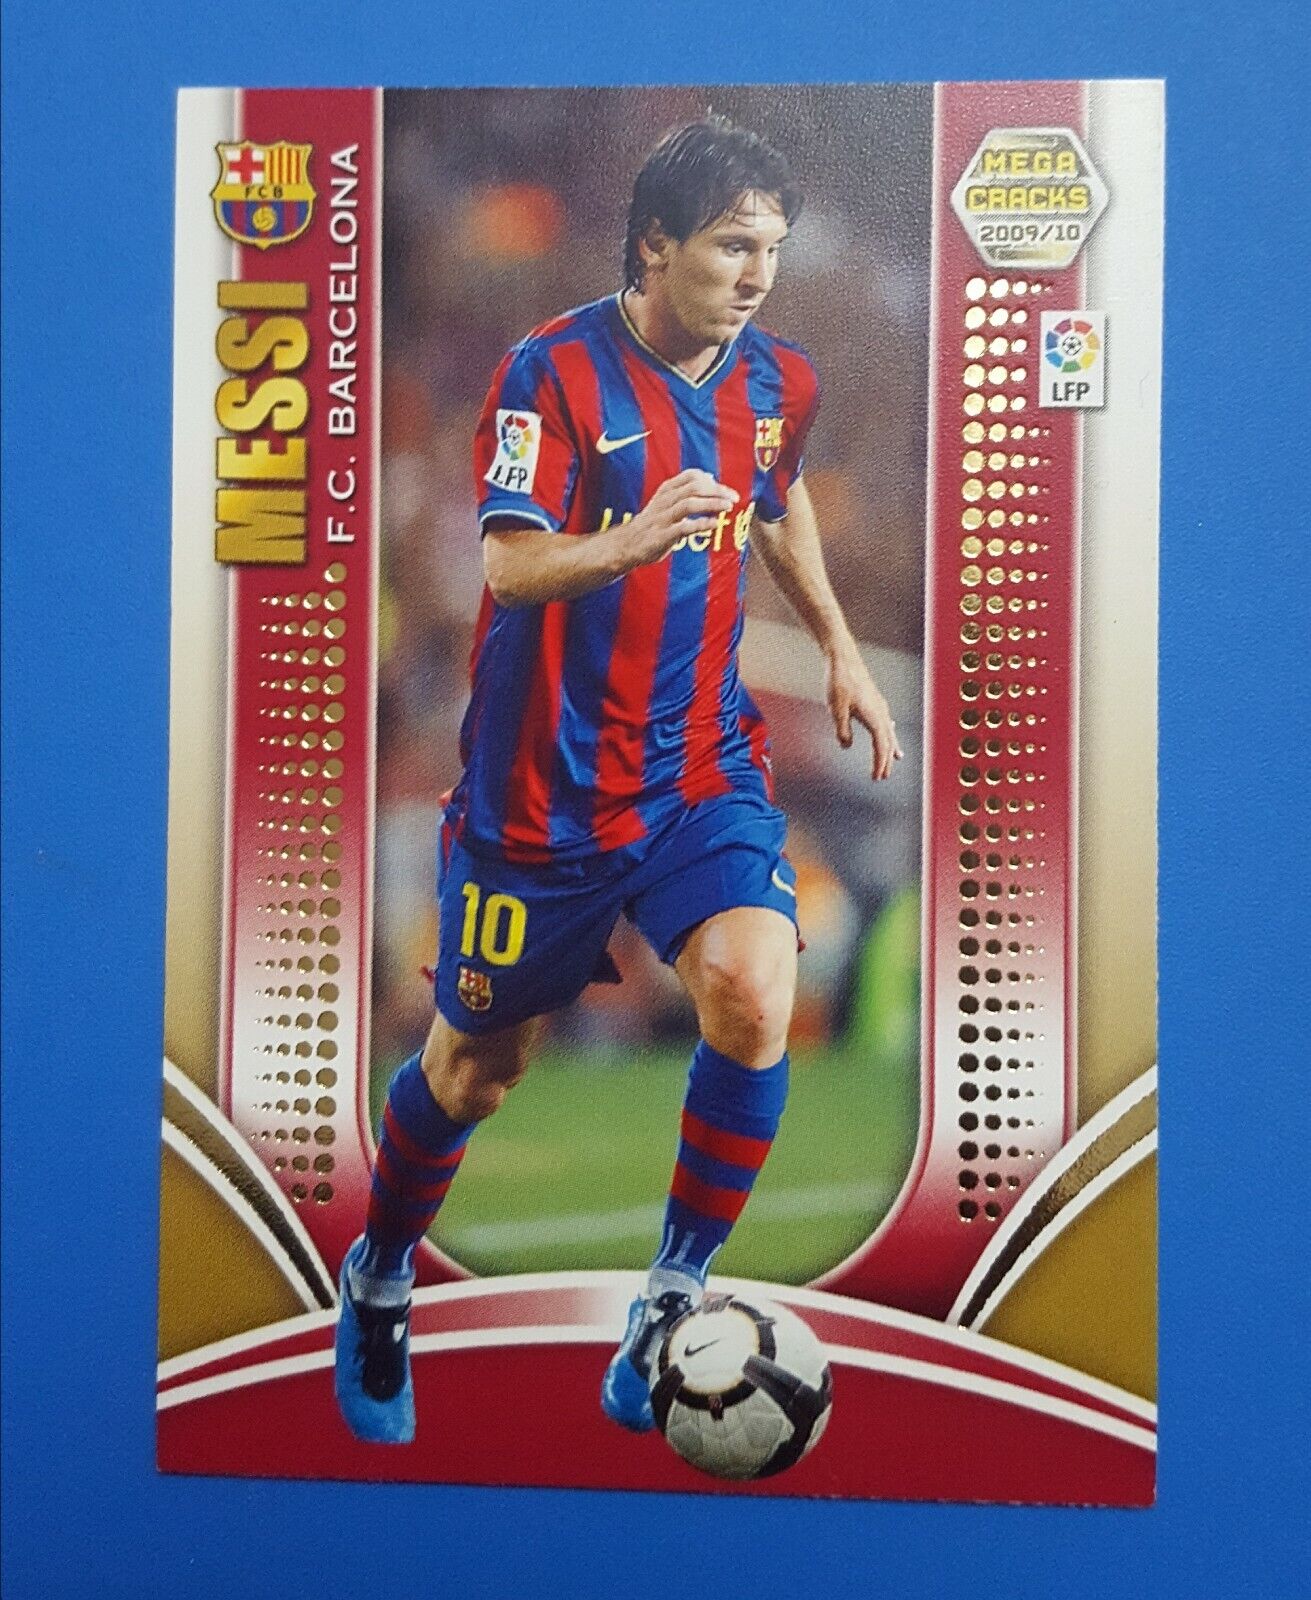 CARD MESSI #69--GOLD SERIES--BARCELONA--MEGACRACKS 2009-2010-MGK-EXCELLENT CONDITION